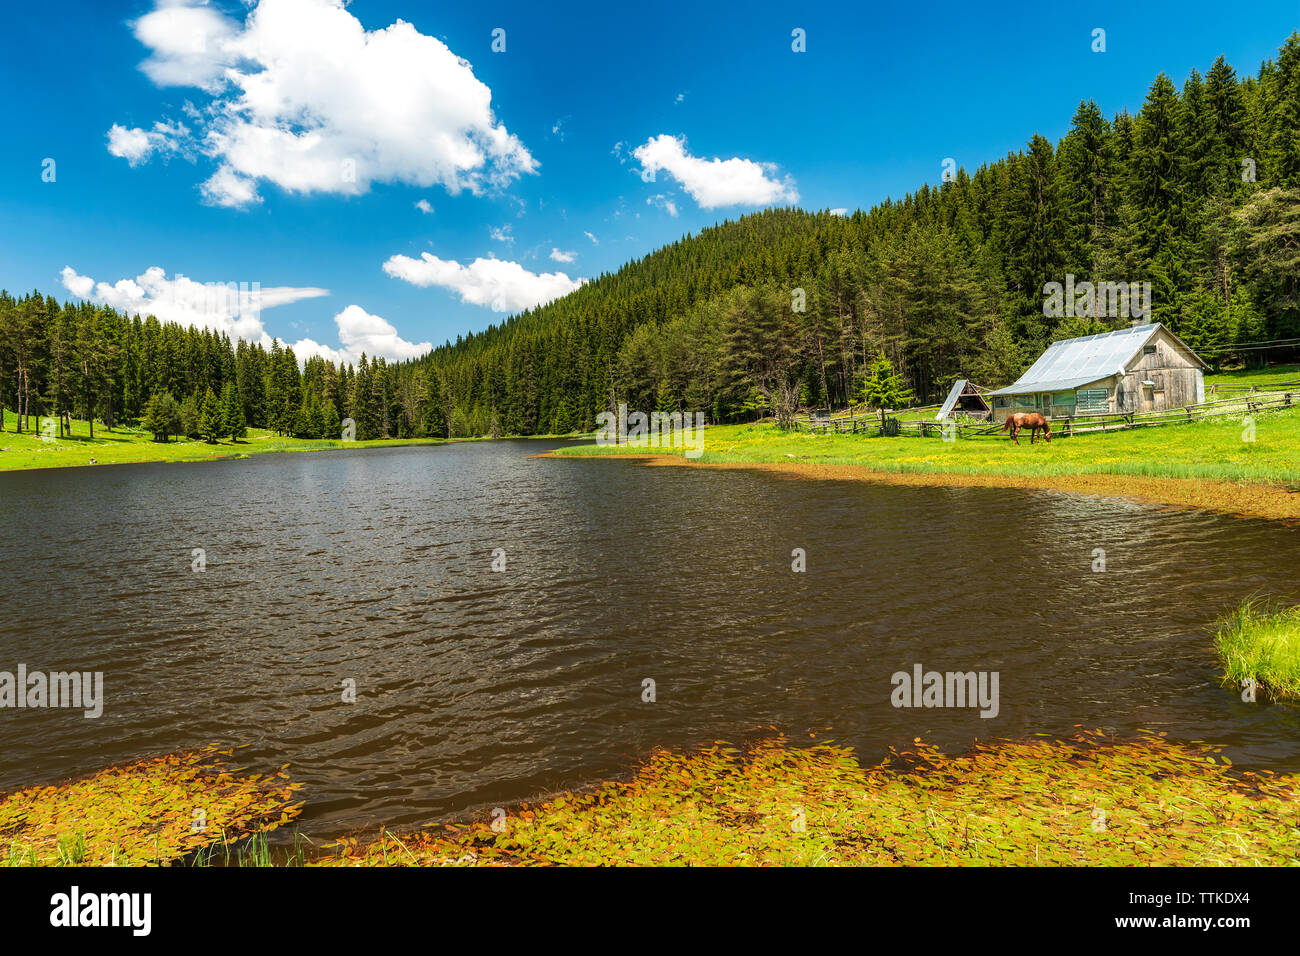 Summer in the mountain, lake and wooden house rural scene Stock Photo